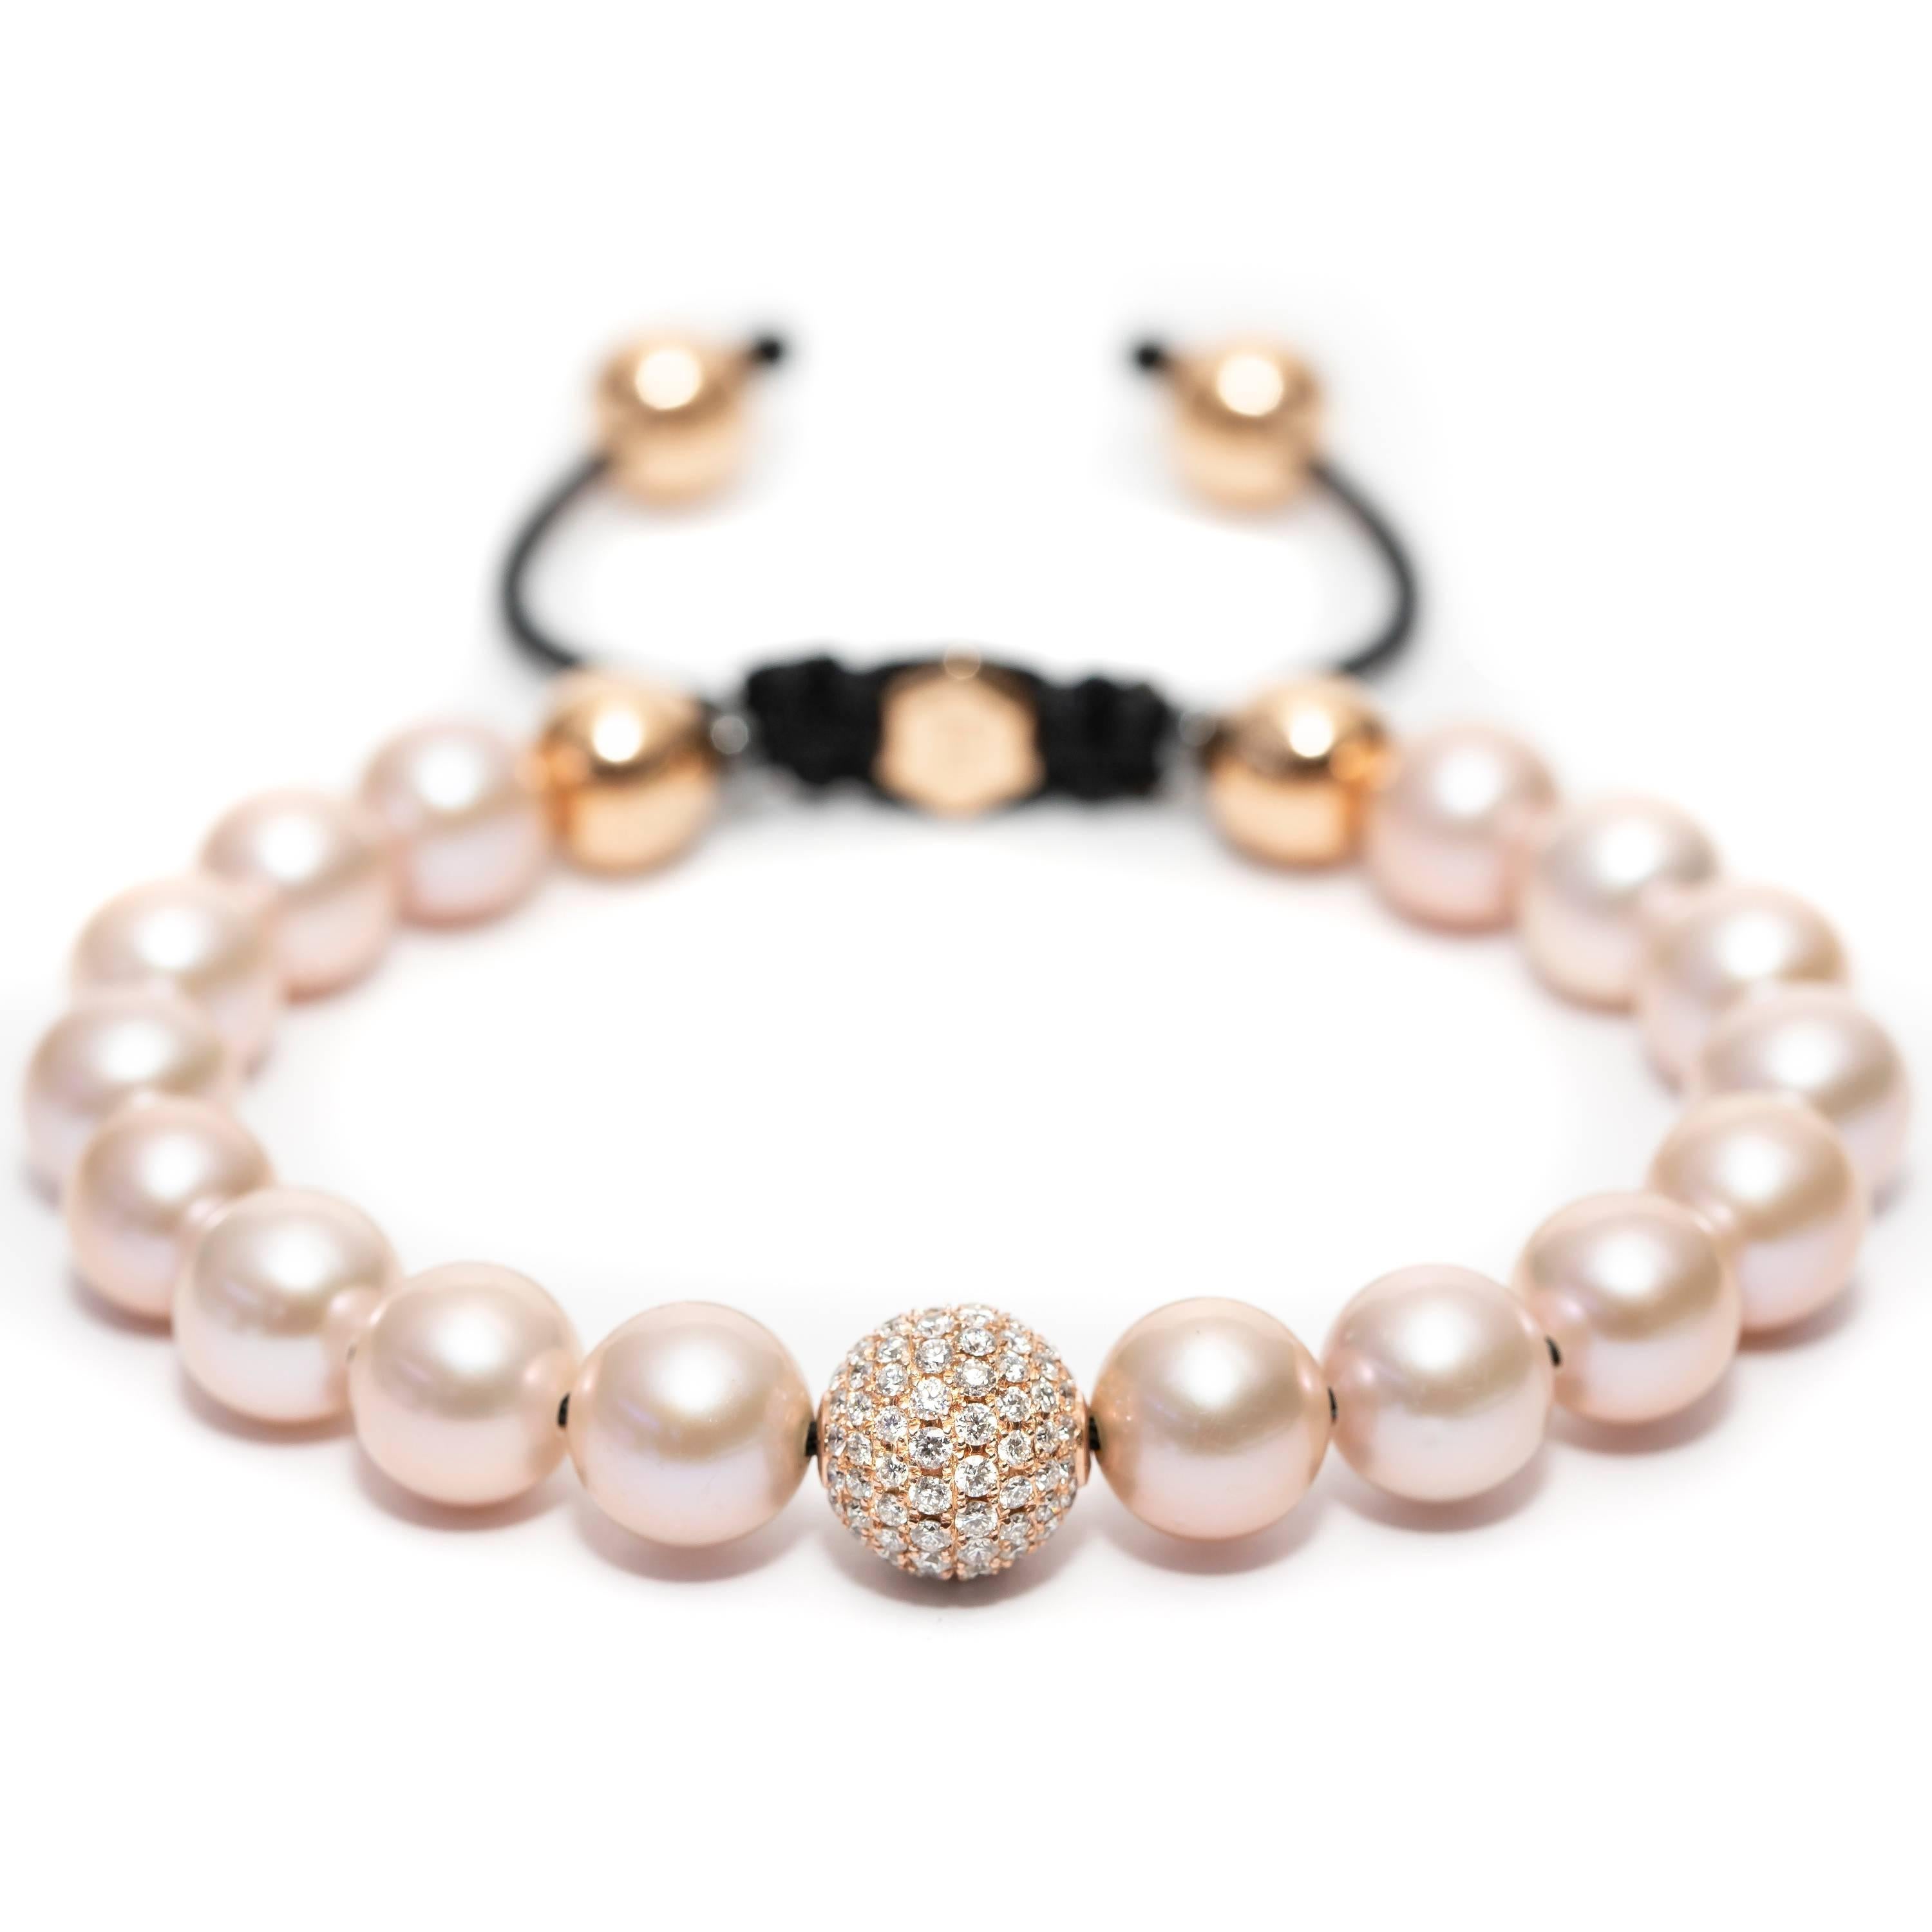 This Contemporary fresh water Pearl Bracelet features an adjustable Cord further highlighted with a Pave set 1.80 Carat Round Brilliant Color G Clarity VS Diamond sphere set in 18 Karat Rose Gold for a luxurious feel. Available in a choice of sizes,